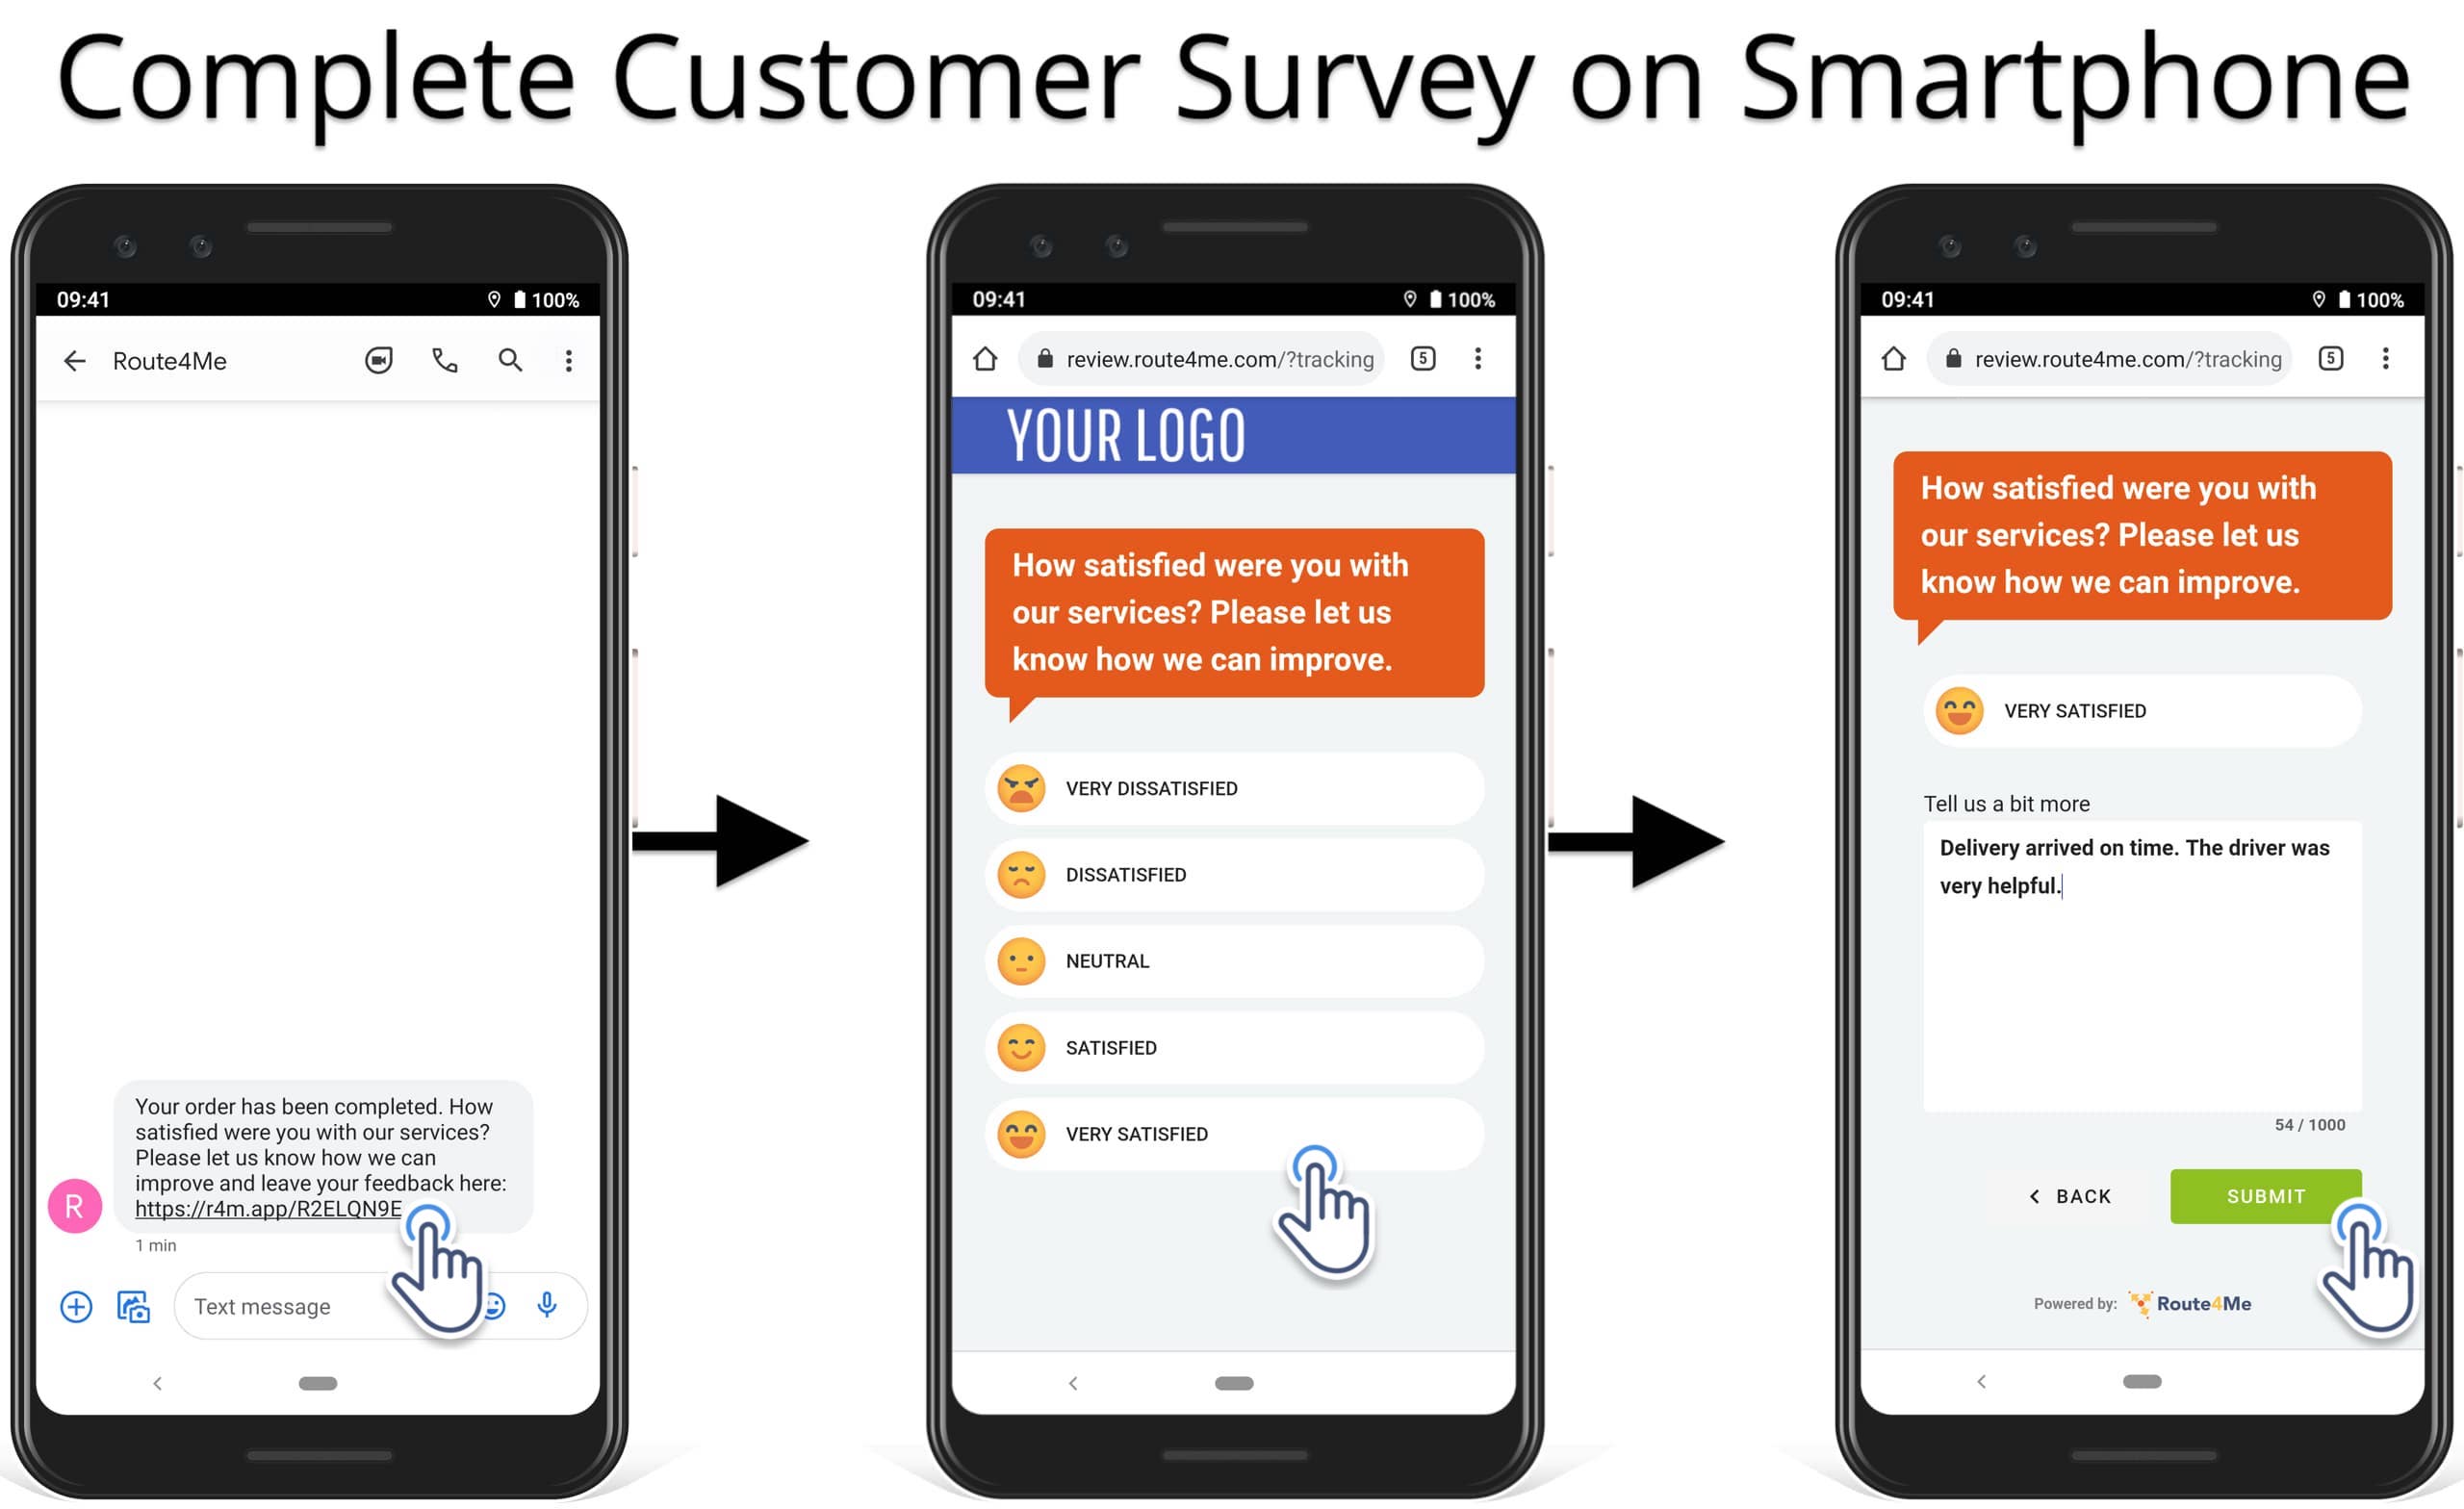 Complete customer survey and leave driver rating from an iOS or Android smartphone.